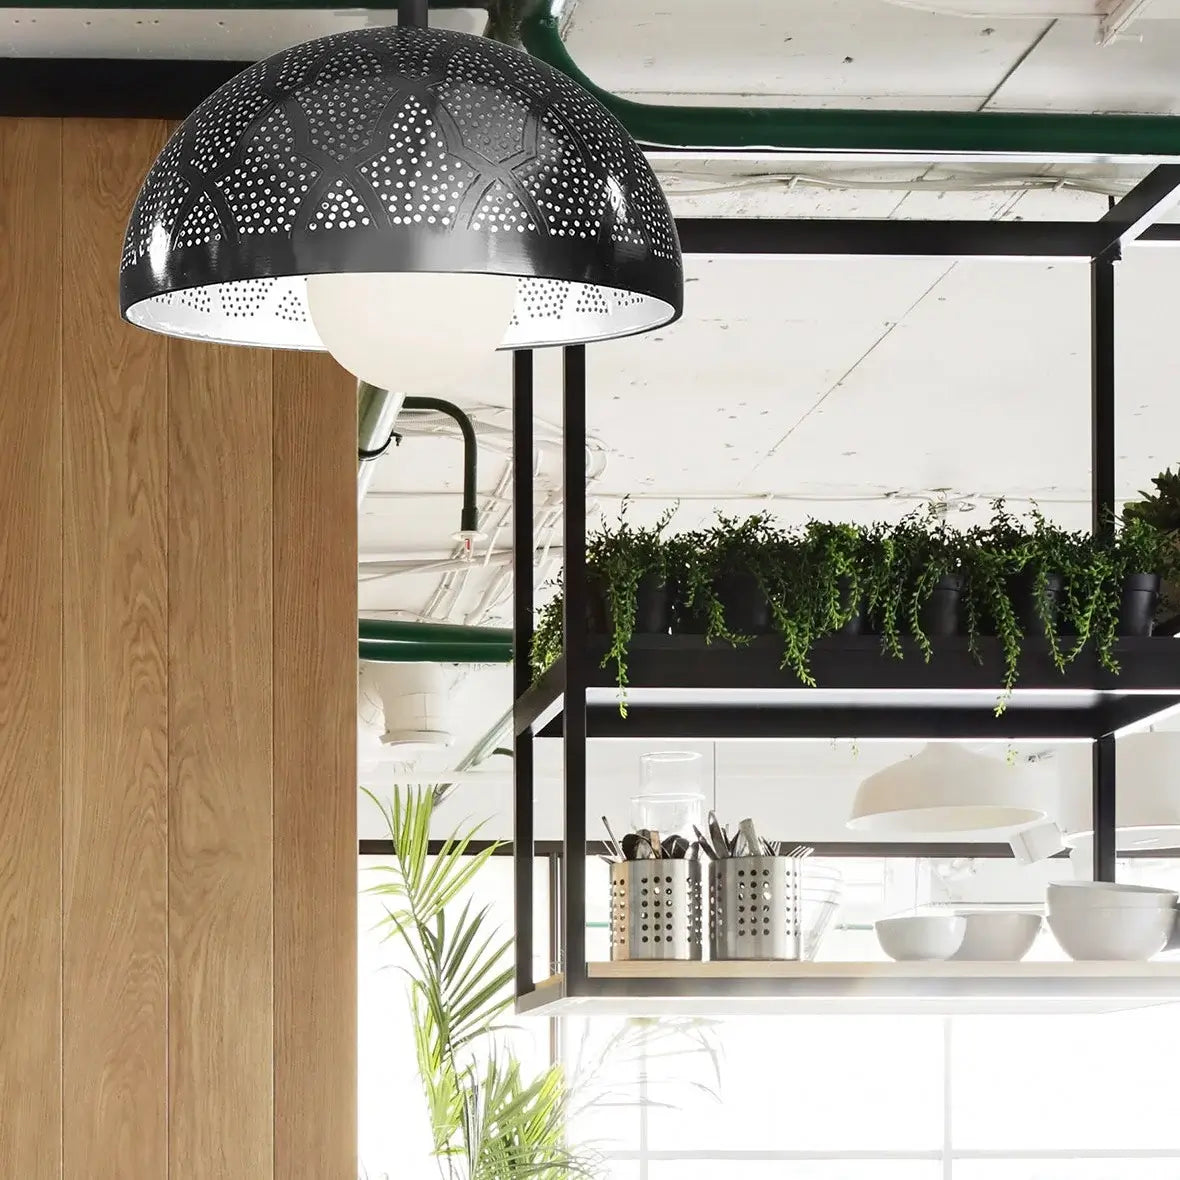 Dounia home Pendant light in black  made of Metal, used as a kitchen lighting, Model: Zana Dome